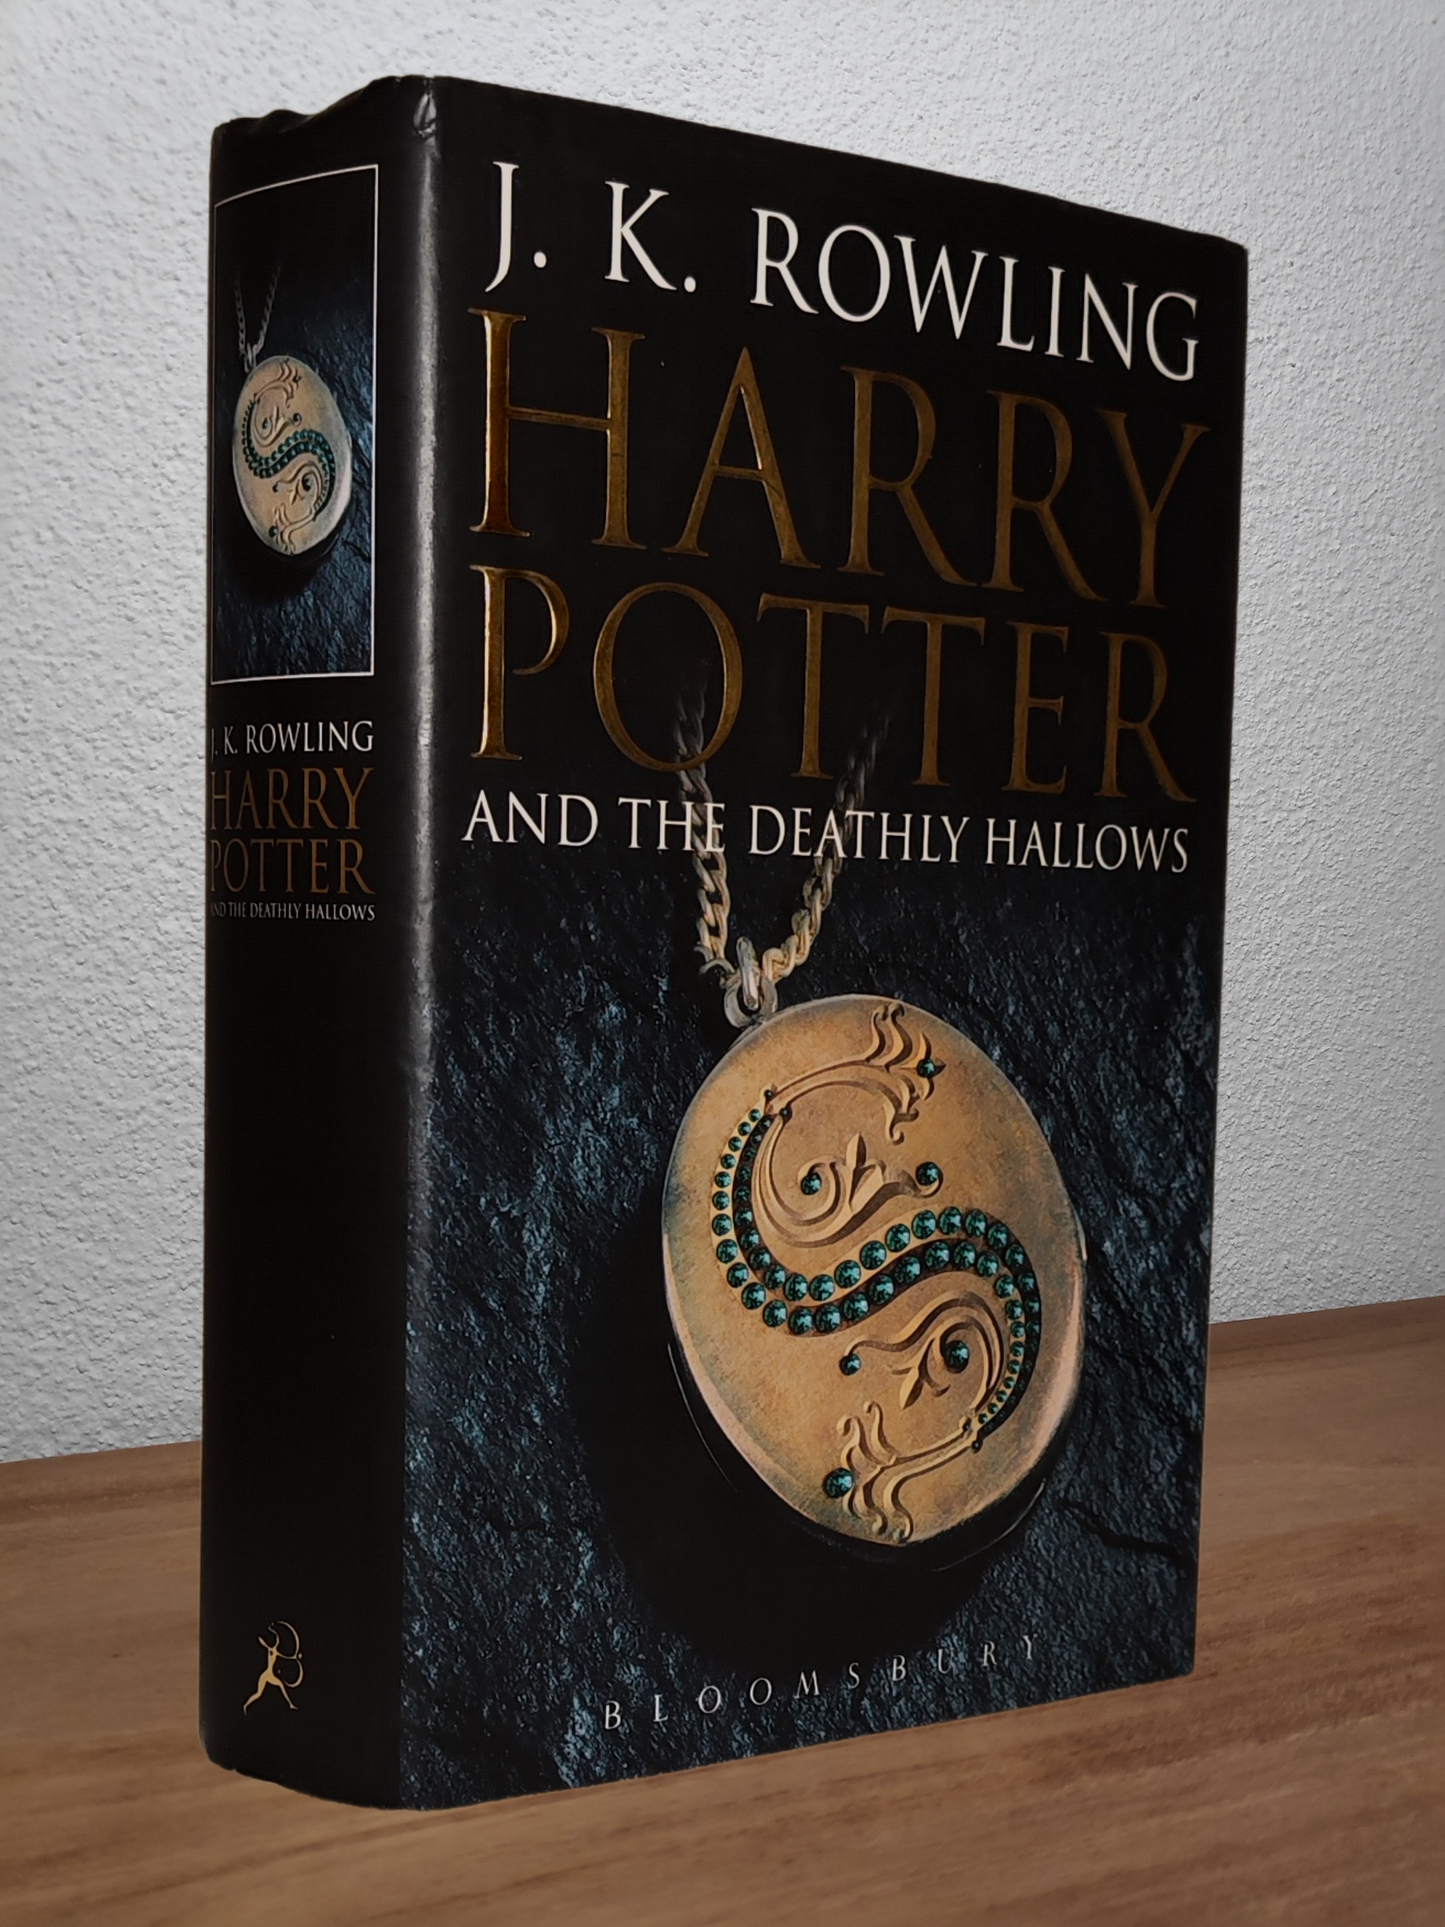  J. K. Rowling - Harry Potter and the Deathly Hallows  - Second-hand english book to deliver in Zurich & Switzerland